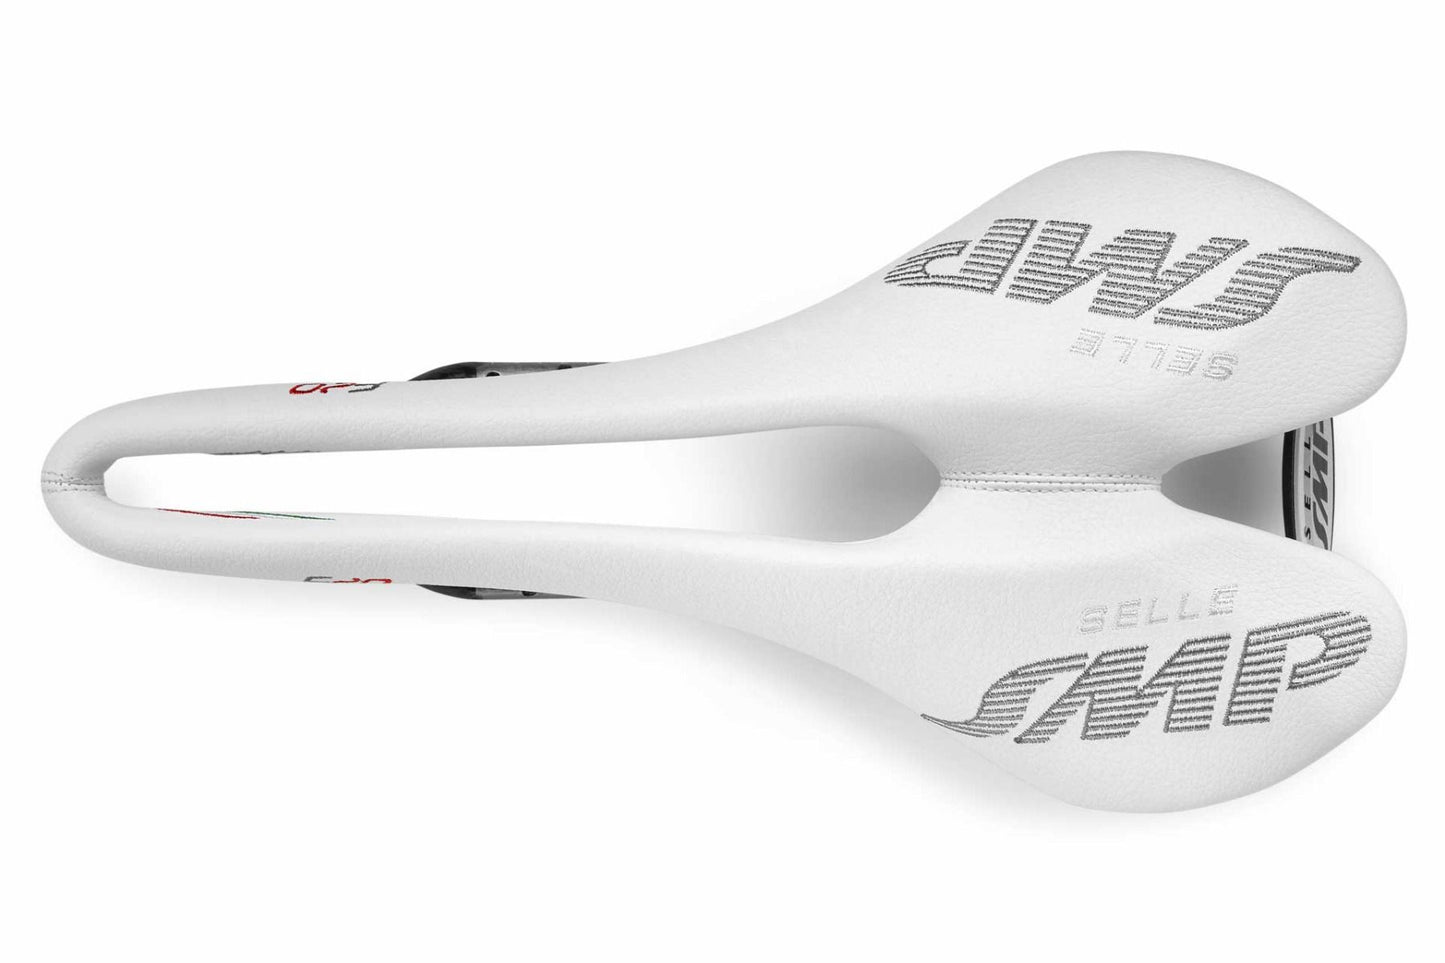 Selle SMP F20 Bicycle Saddle with Steel Rail (White)